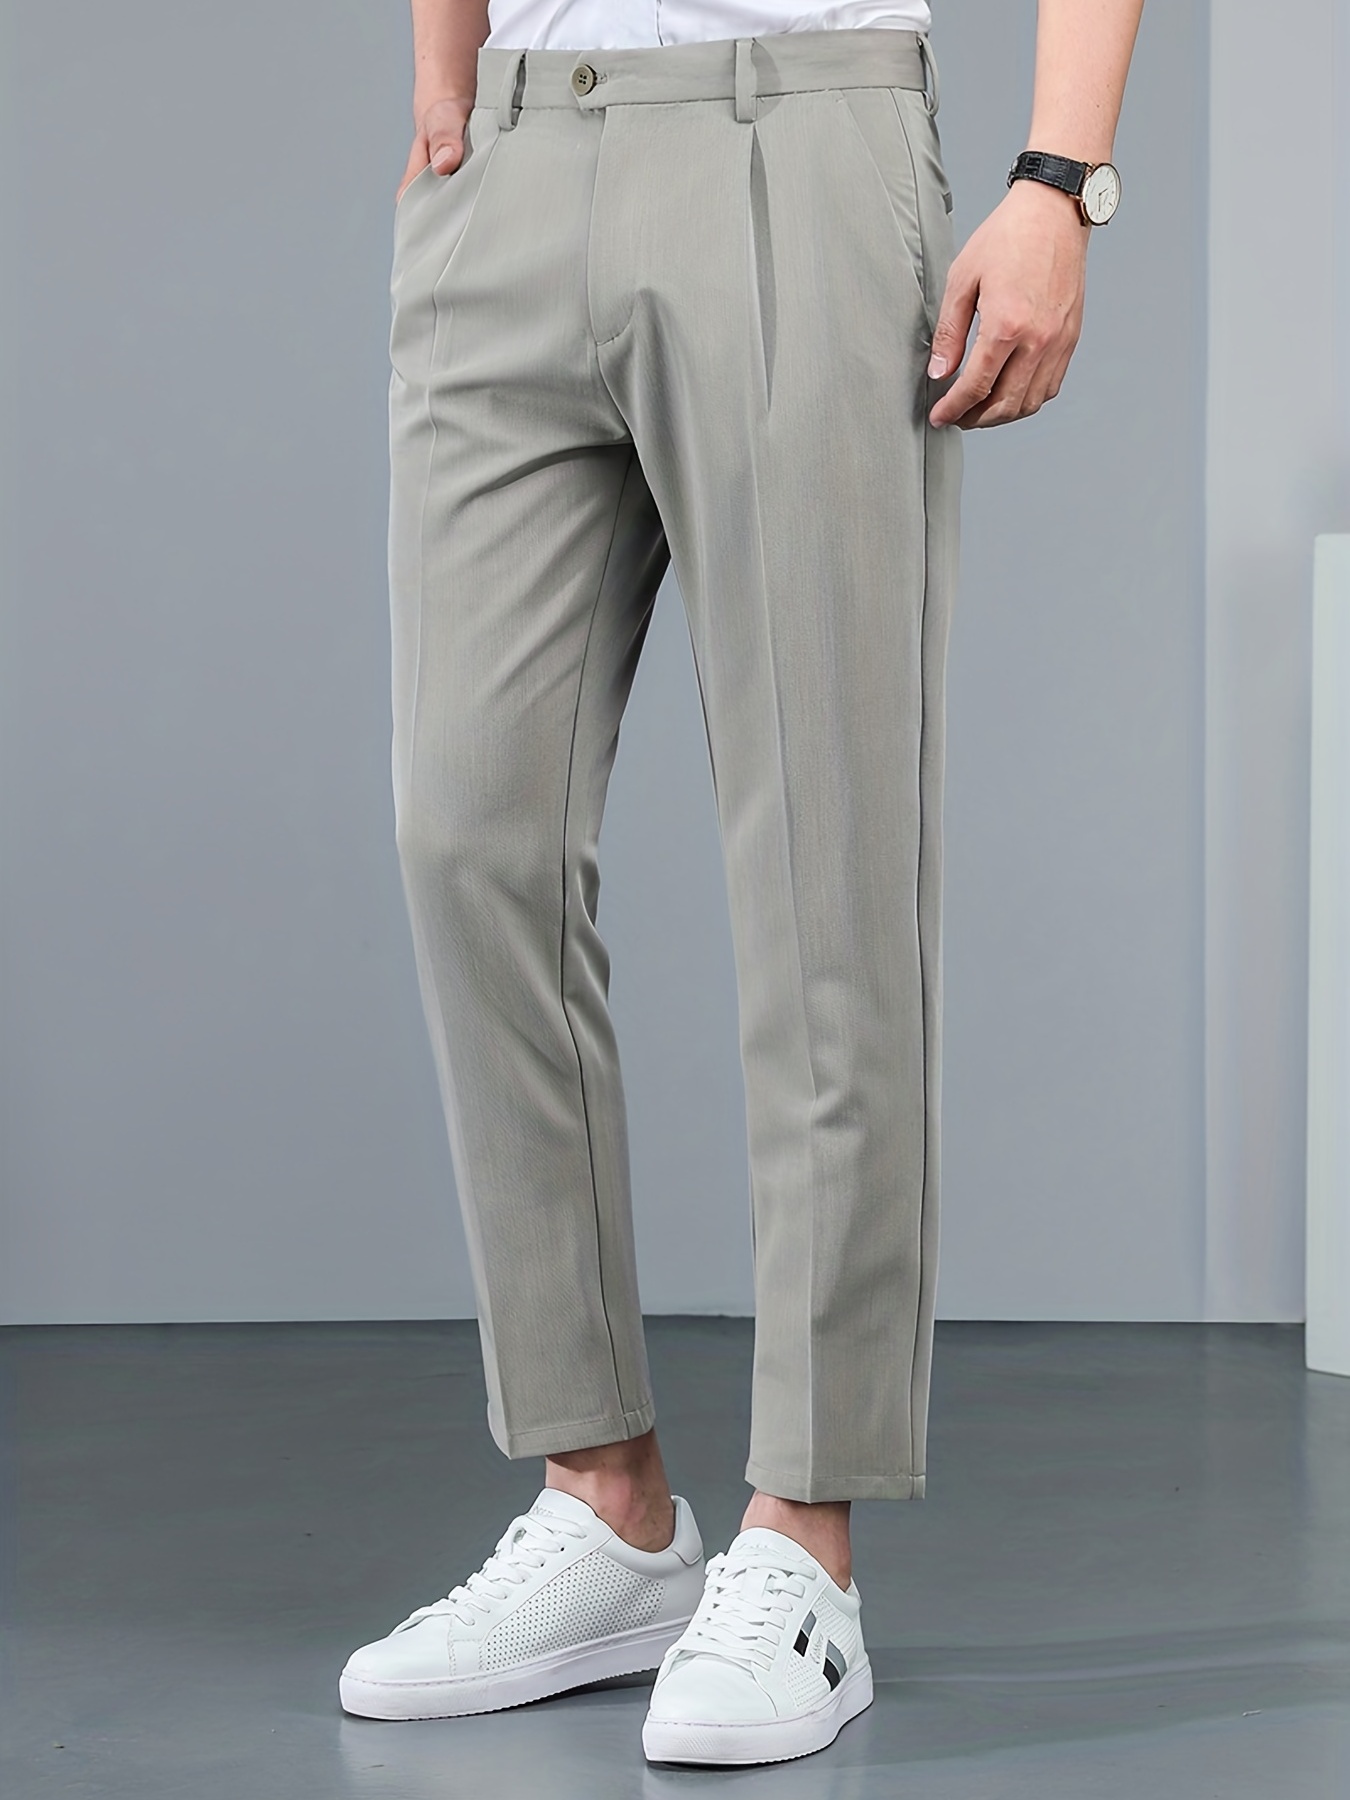 Classic Trendy Ankle Length Straight Pants  Casual outfits, Korean casual  outfits, Casual style outfits